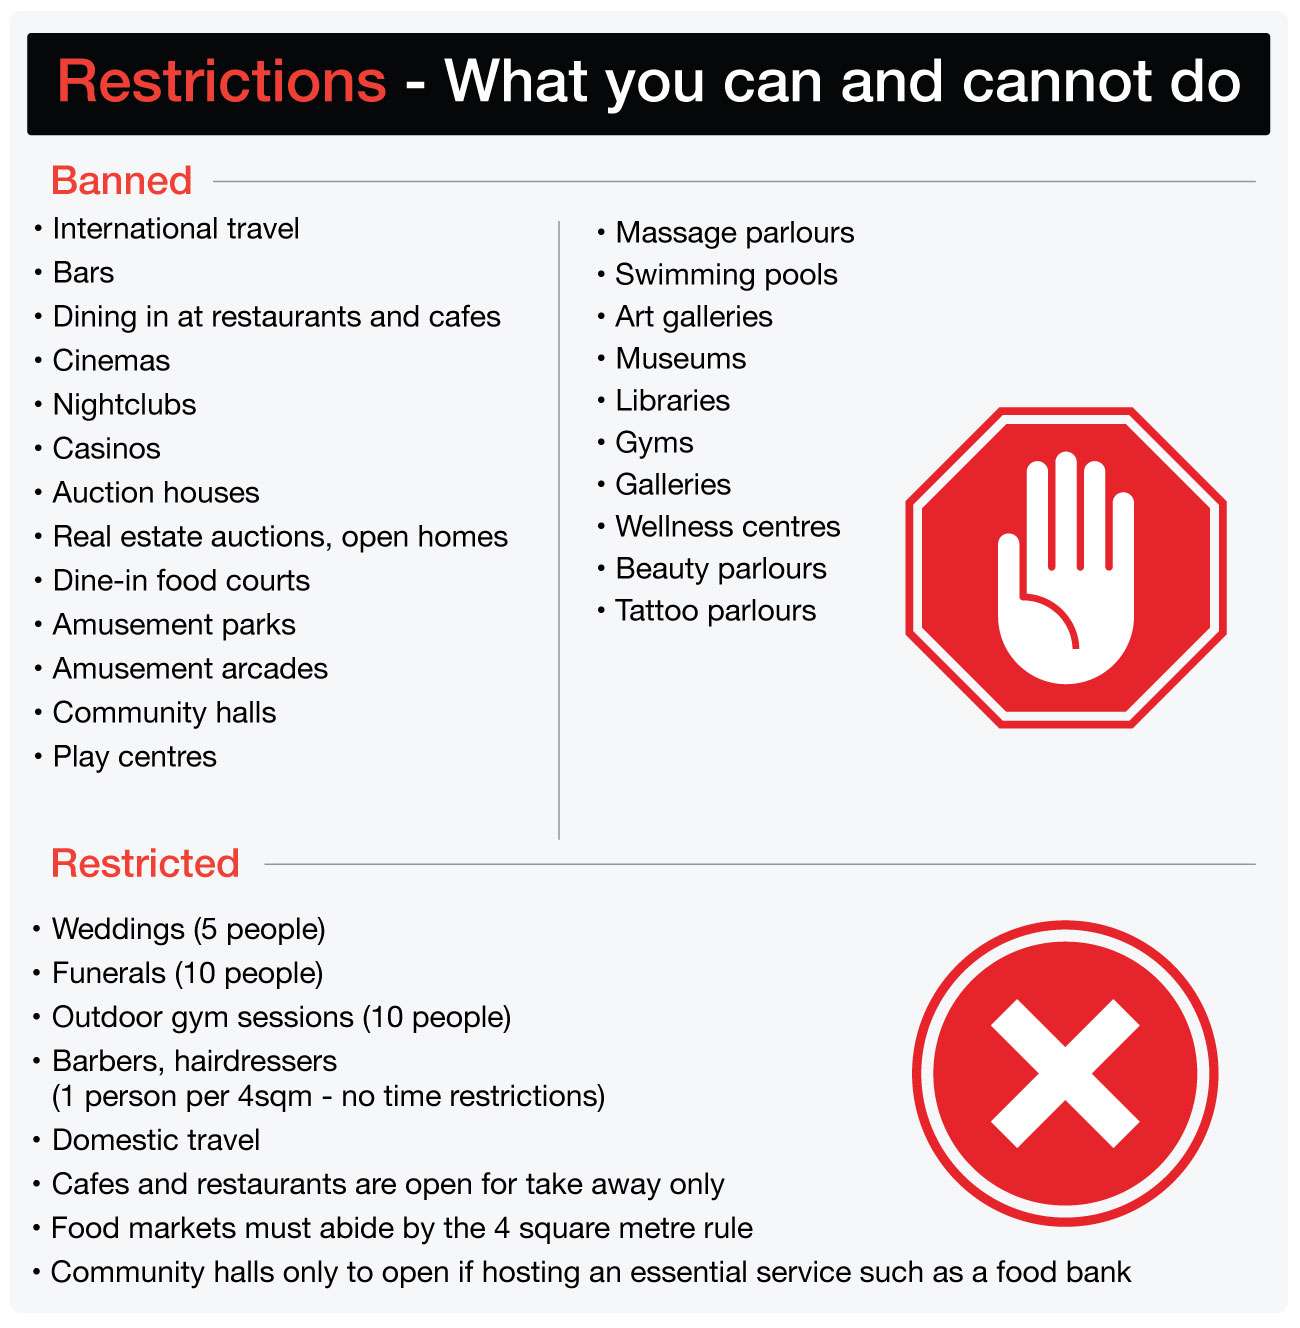 NED-1460-Restrictions-What-you-can-and-cannot-do_H832KooA-.jpg